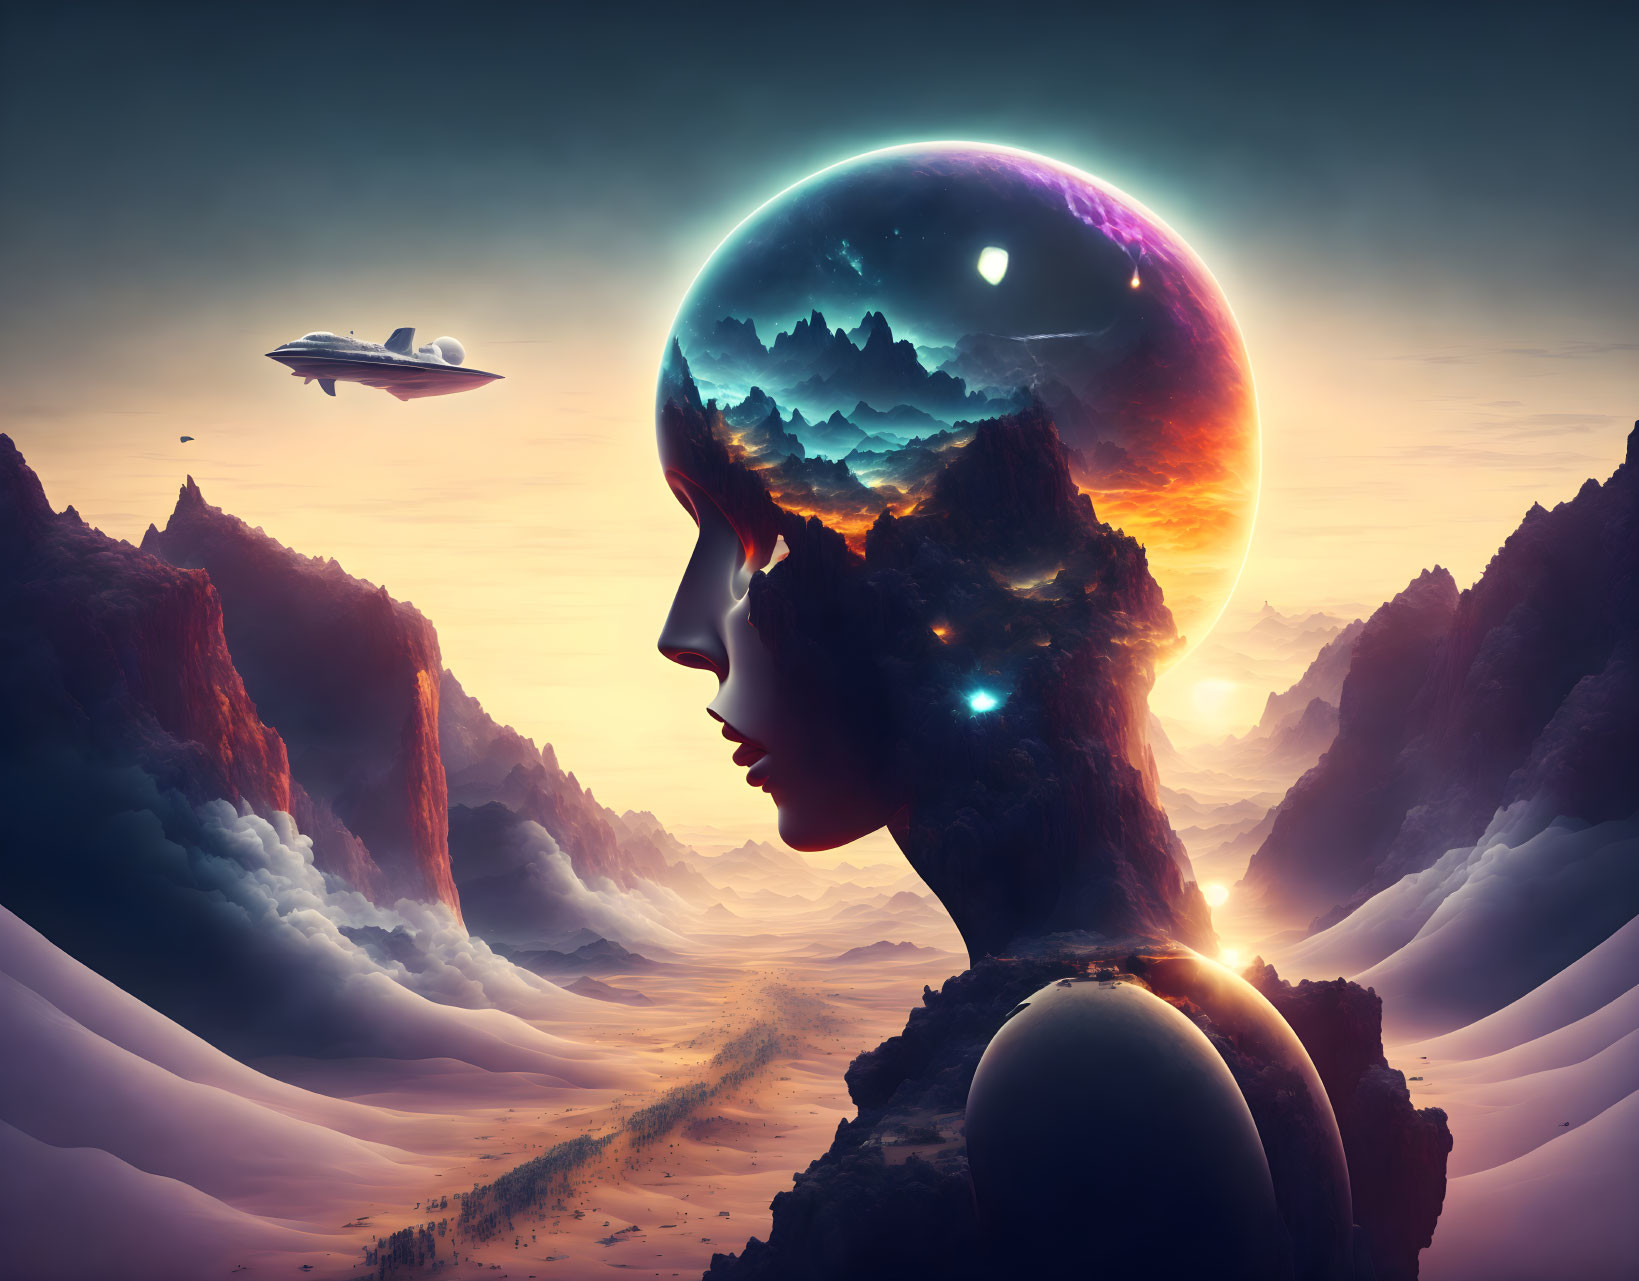 Silhouette with cosmic landscape head, cliffs, twilight sky, spaceship